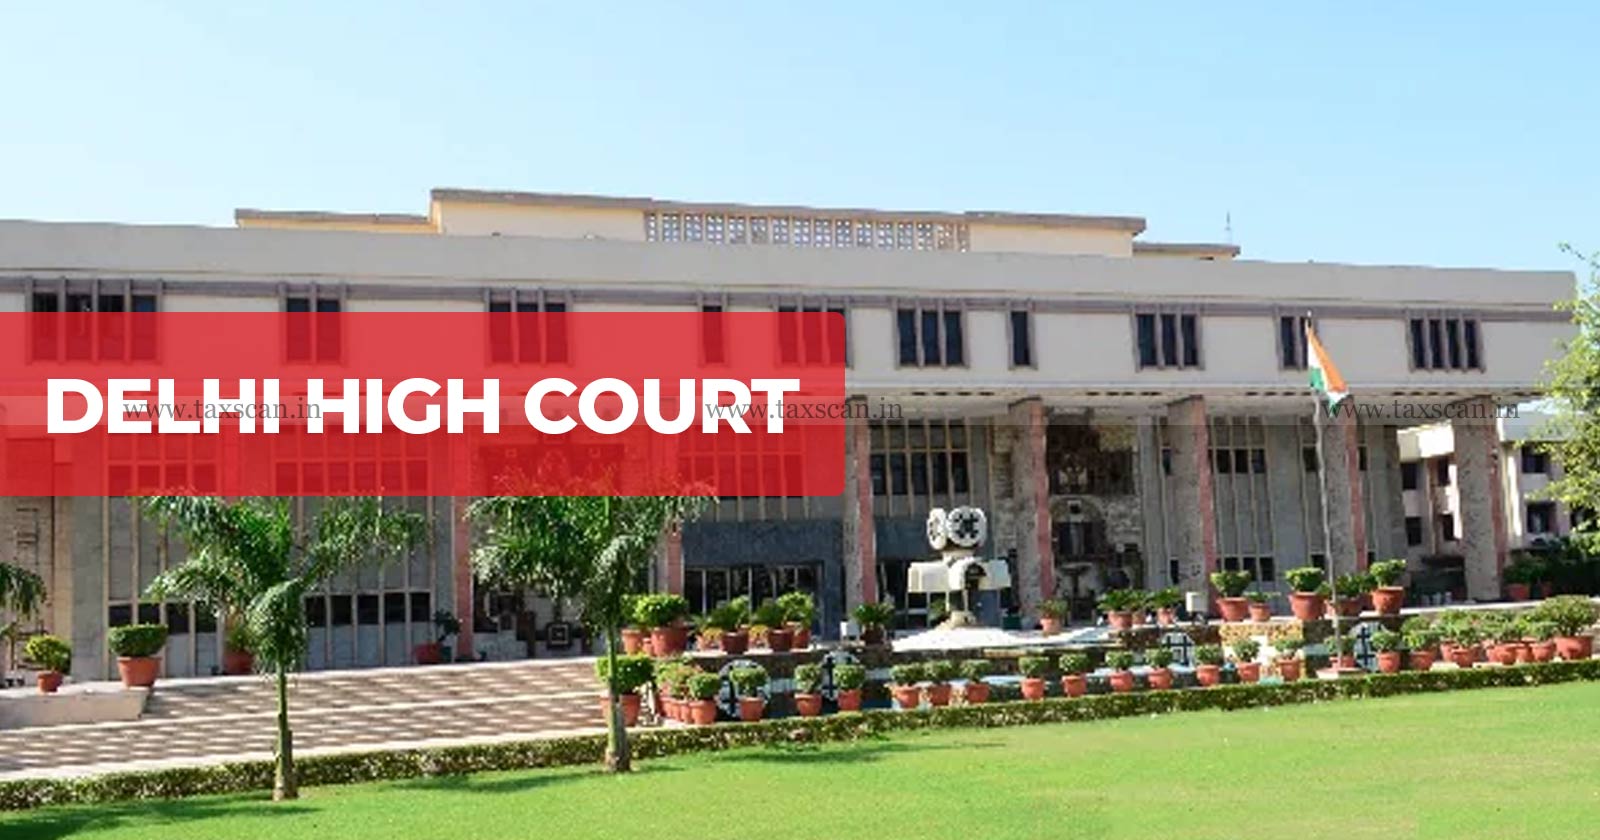 Delhi high court - income tax act - income tax department - National assessment center - TAXSCAN